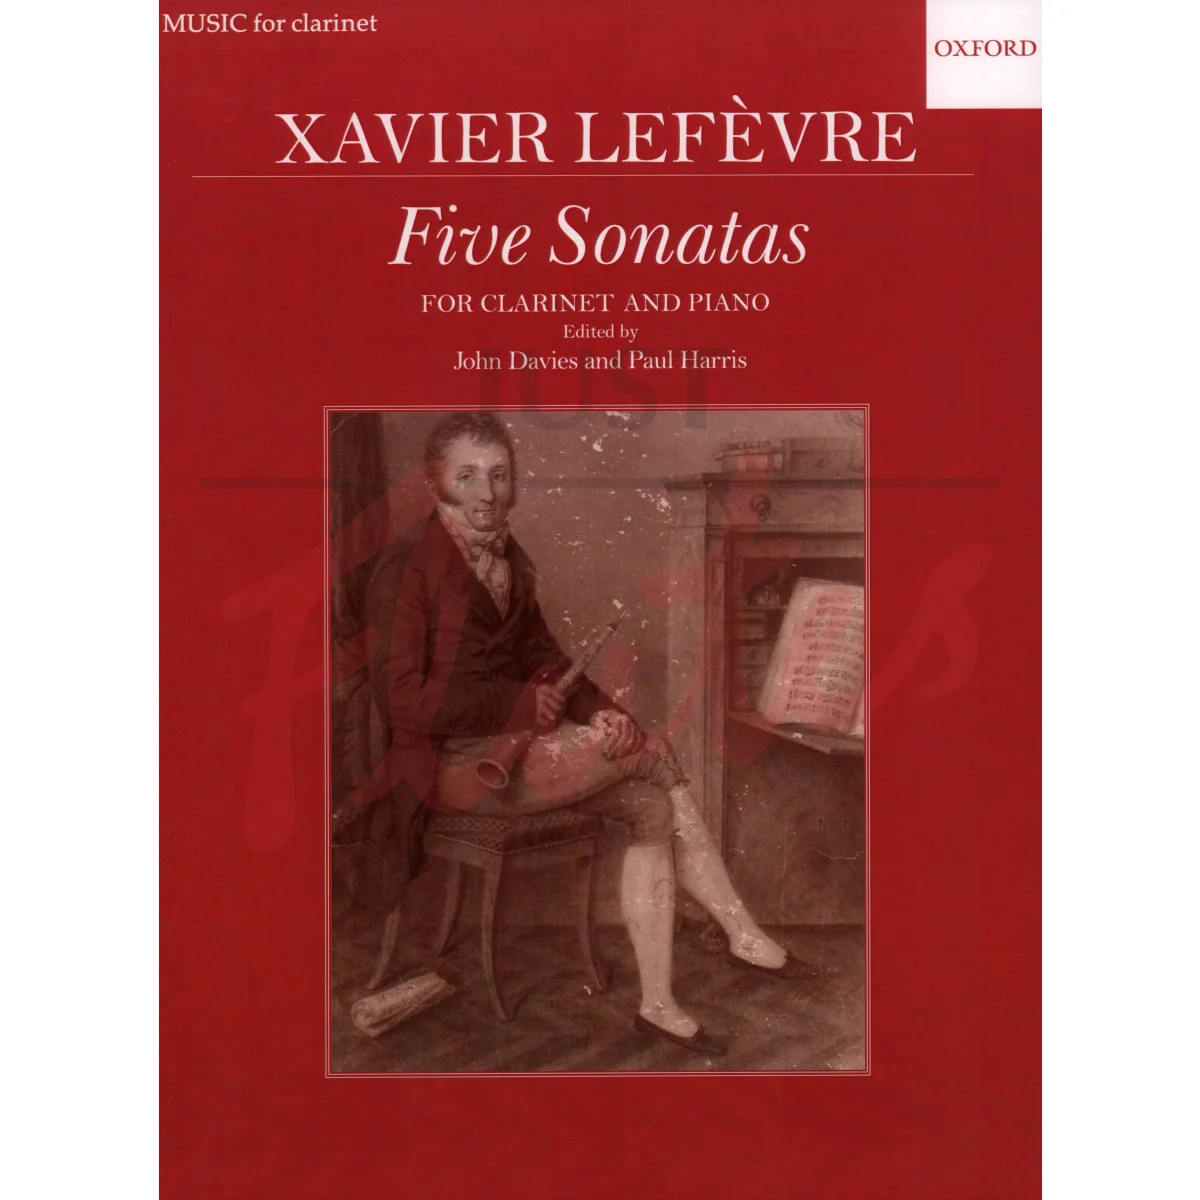 Five Sonatas for Clarinet and Piano